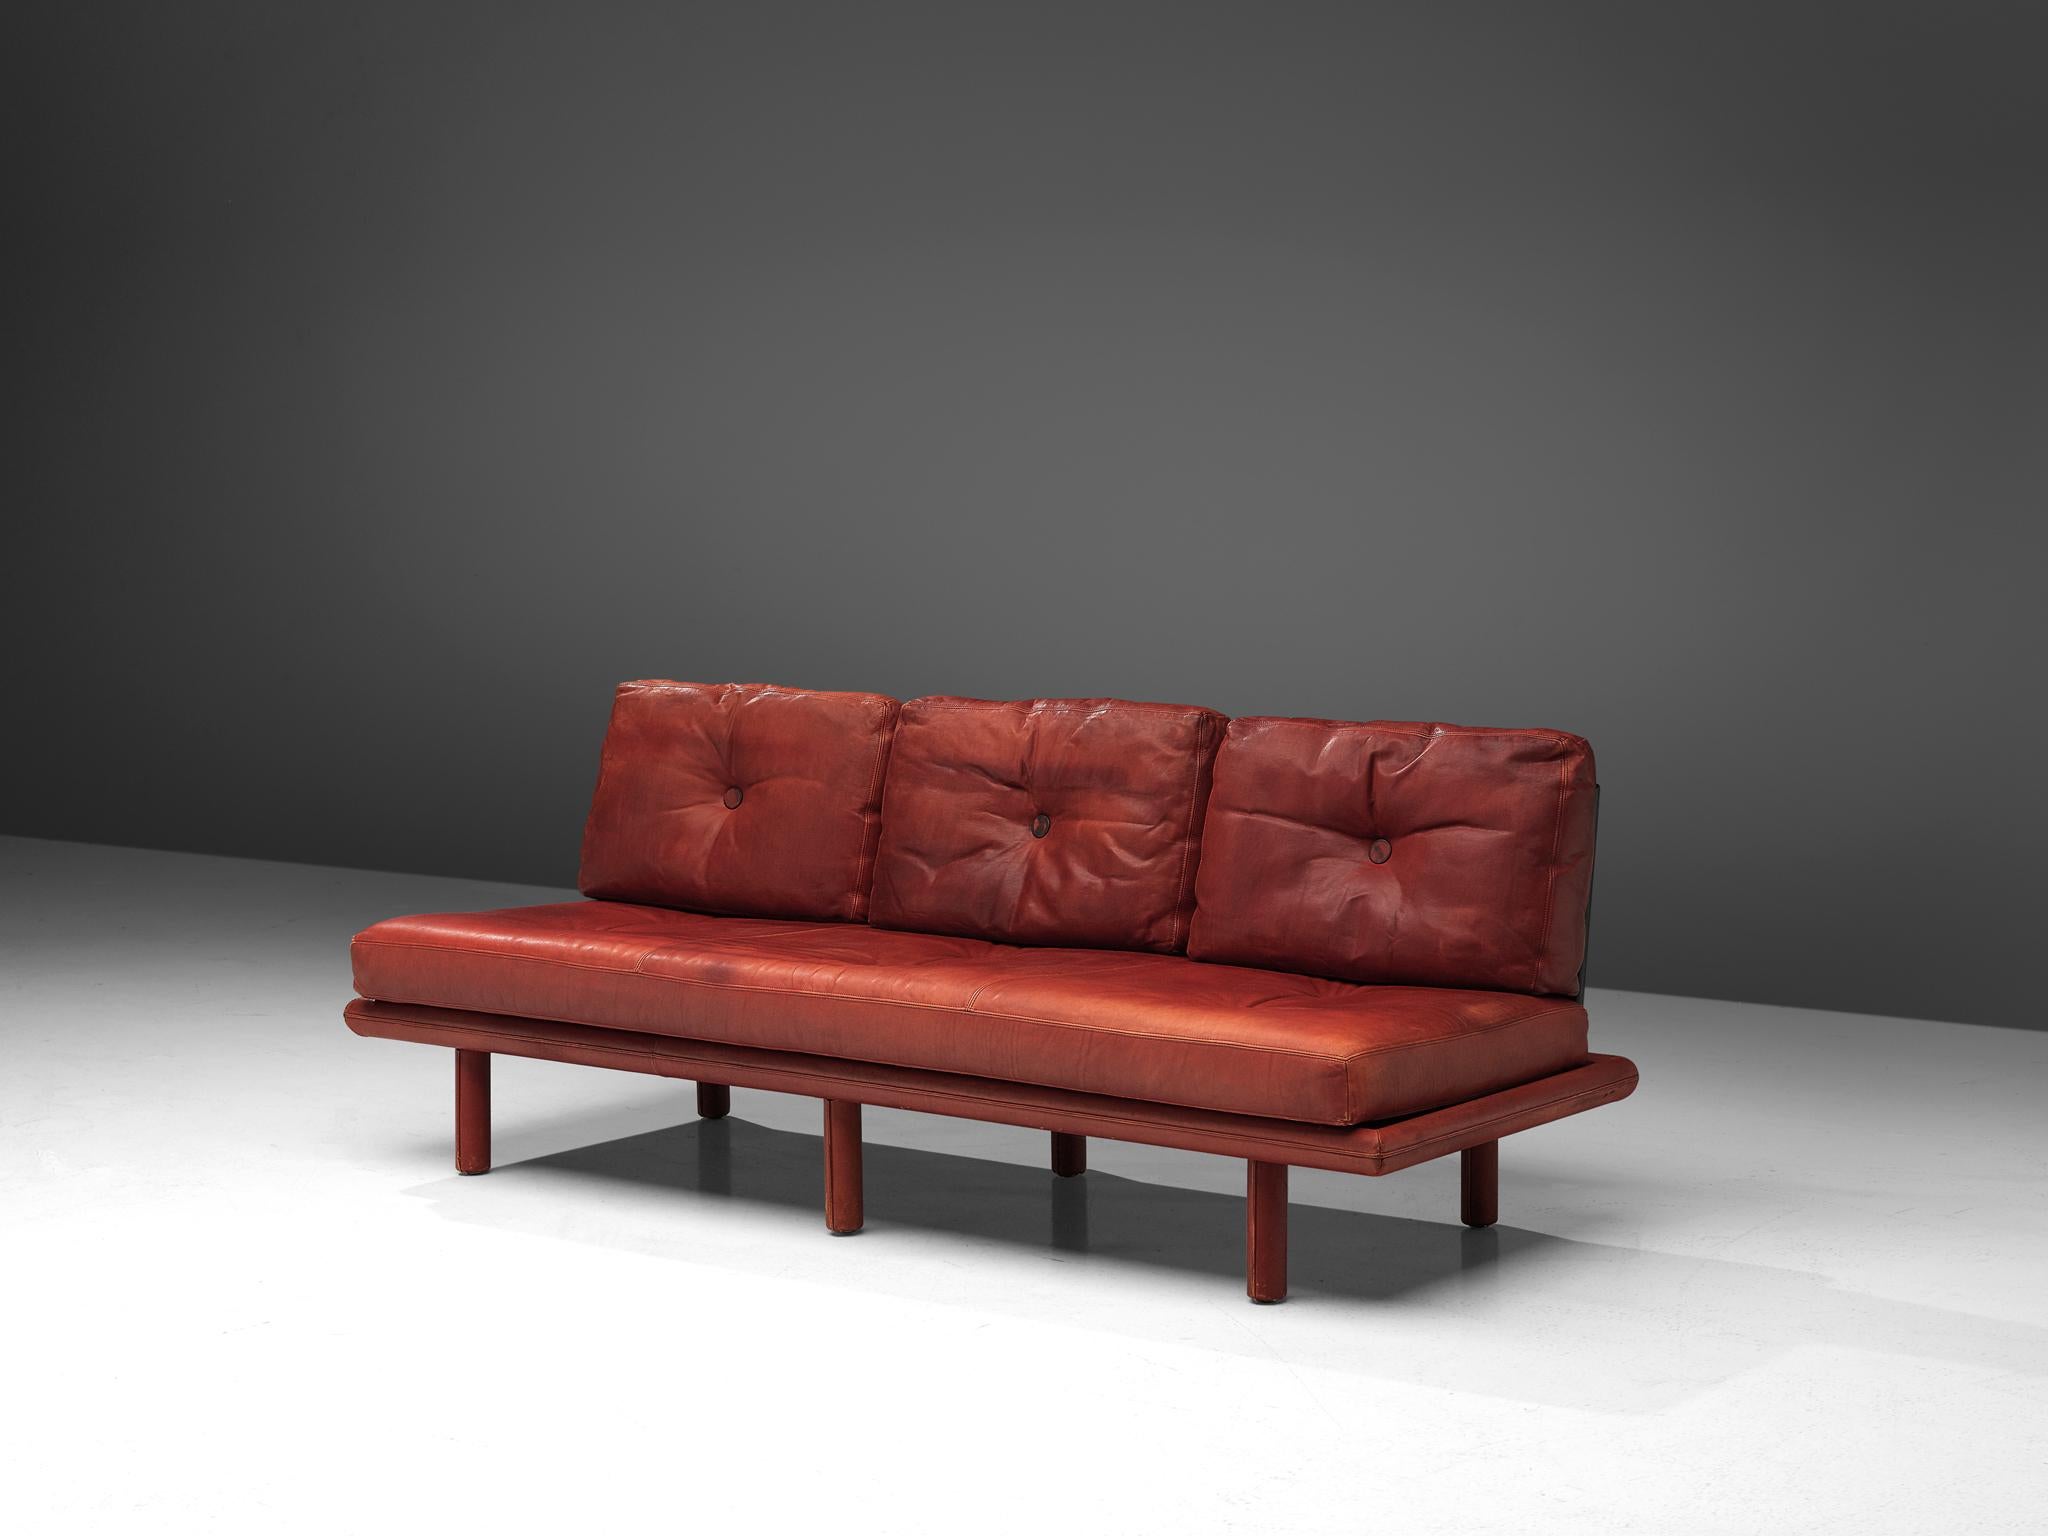 Franz Köttgen for Kill International, three-seat sofa, leather, Denmark, 1960s

Highly comfortable sofa in patinated red leather by Franz Köttgen. The design is simplistic, yet very modern. Leather is stitched and molded on to the frame and legs, a